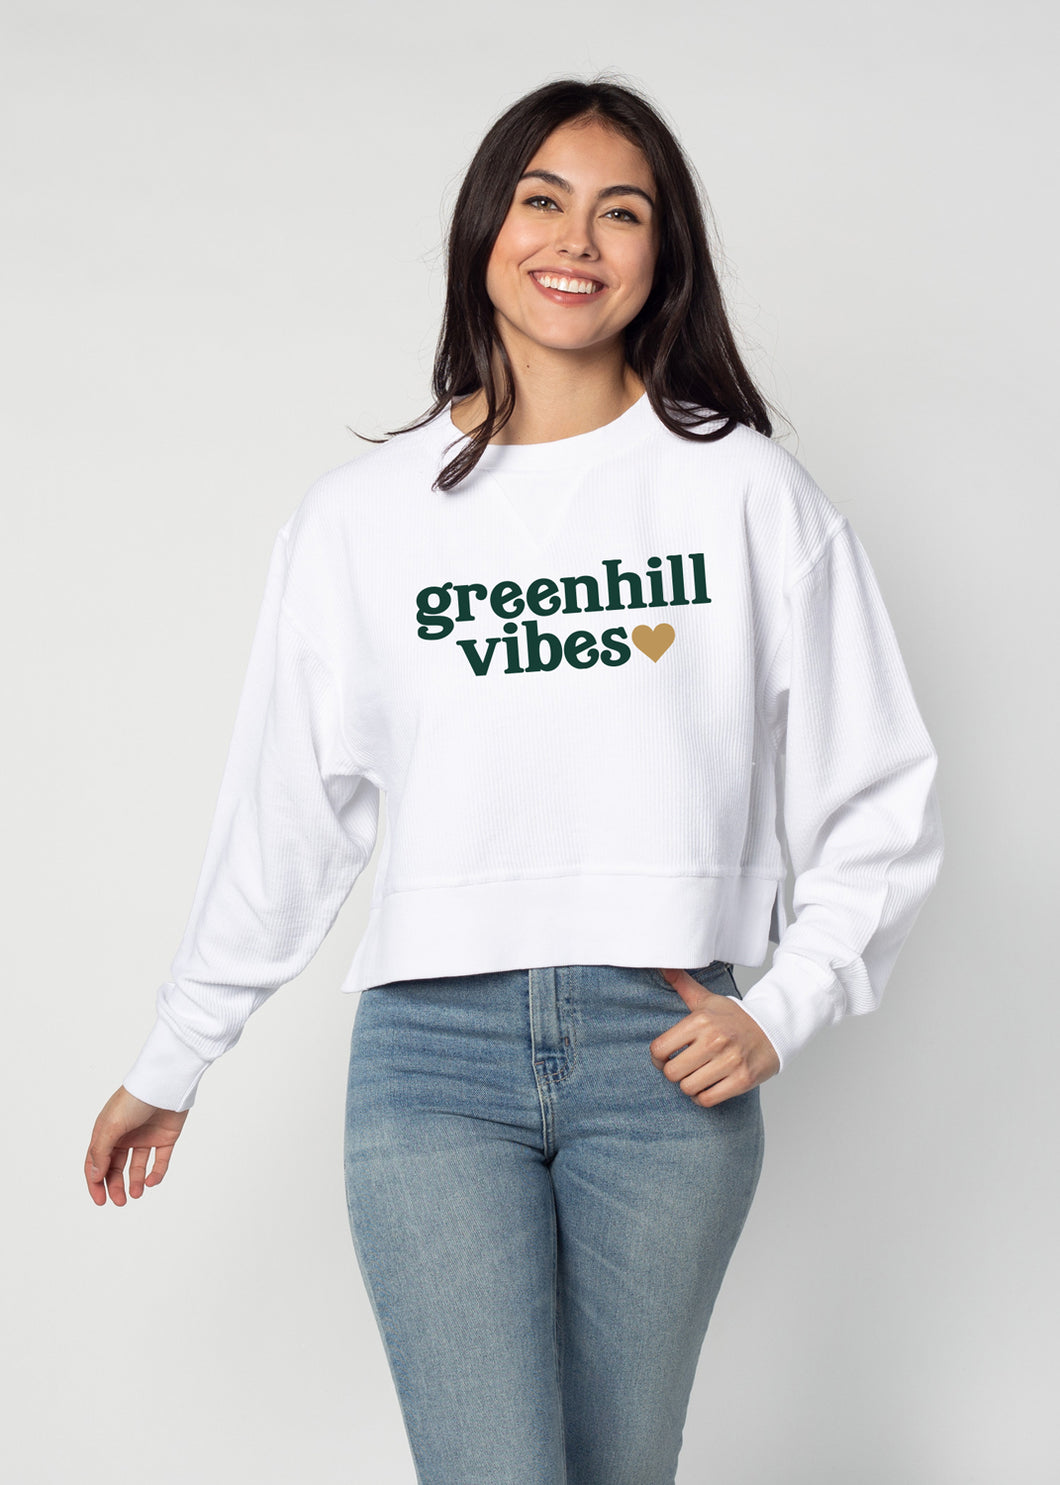 Greenhill Chicka-D Greenhill Vibes Corded Cropped Crew